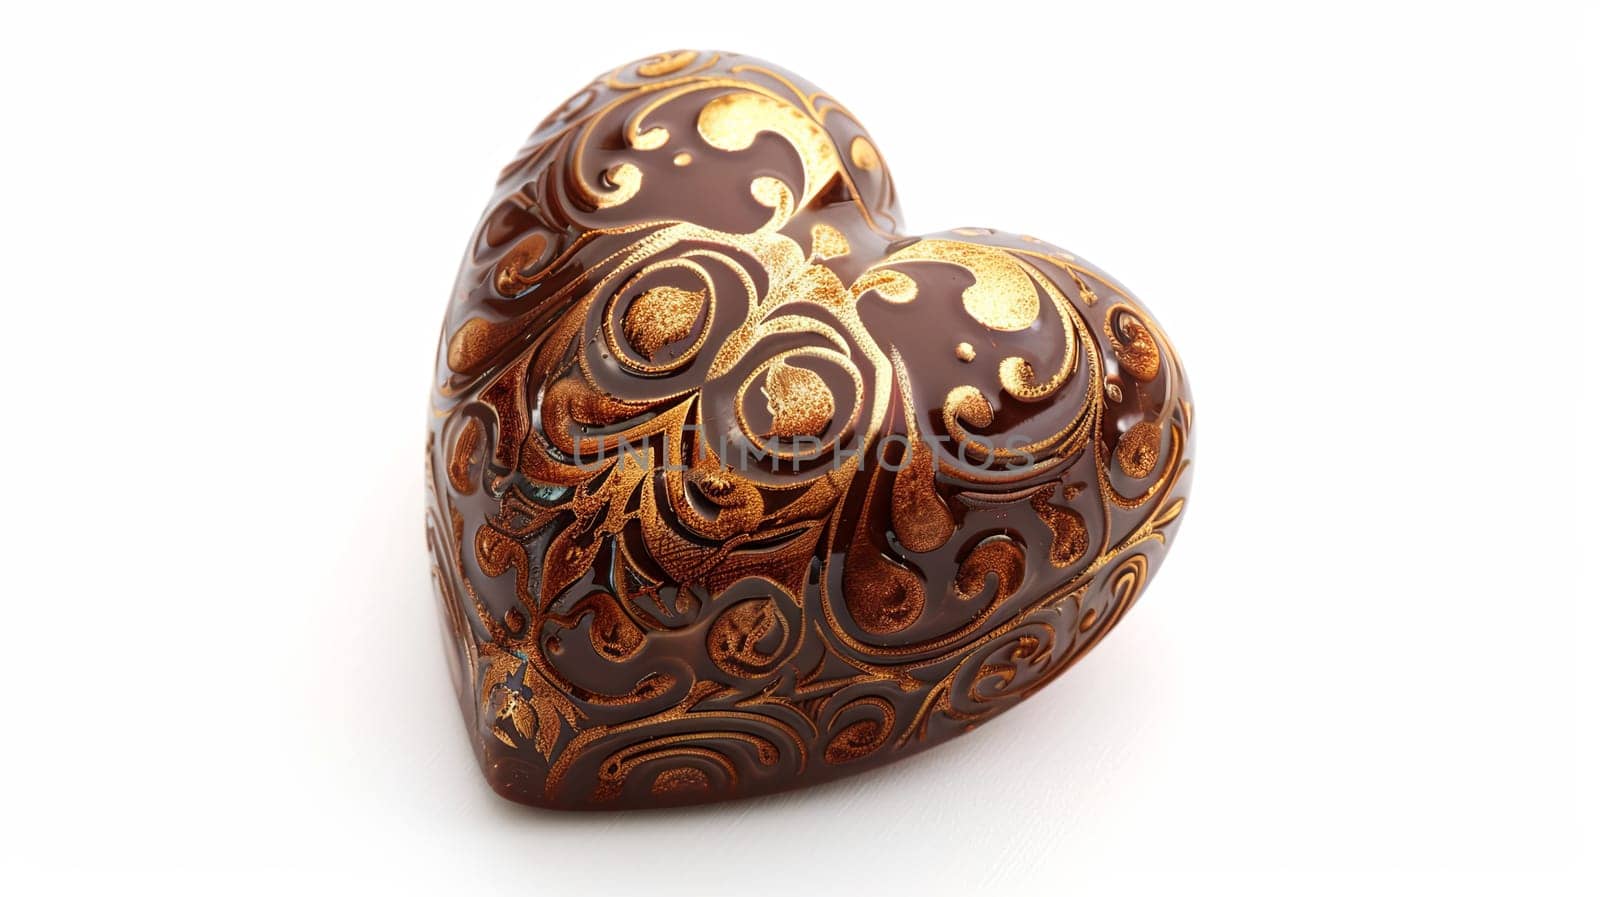 A detailed brown heart-shaped box with golden accents sits elegantly on a table against a white background.